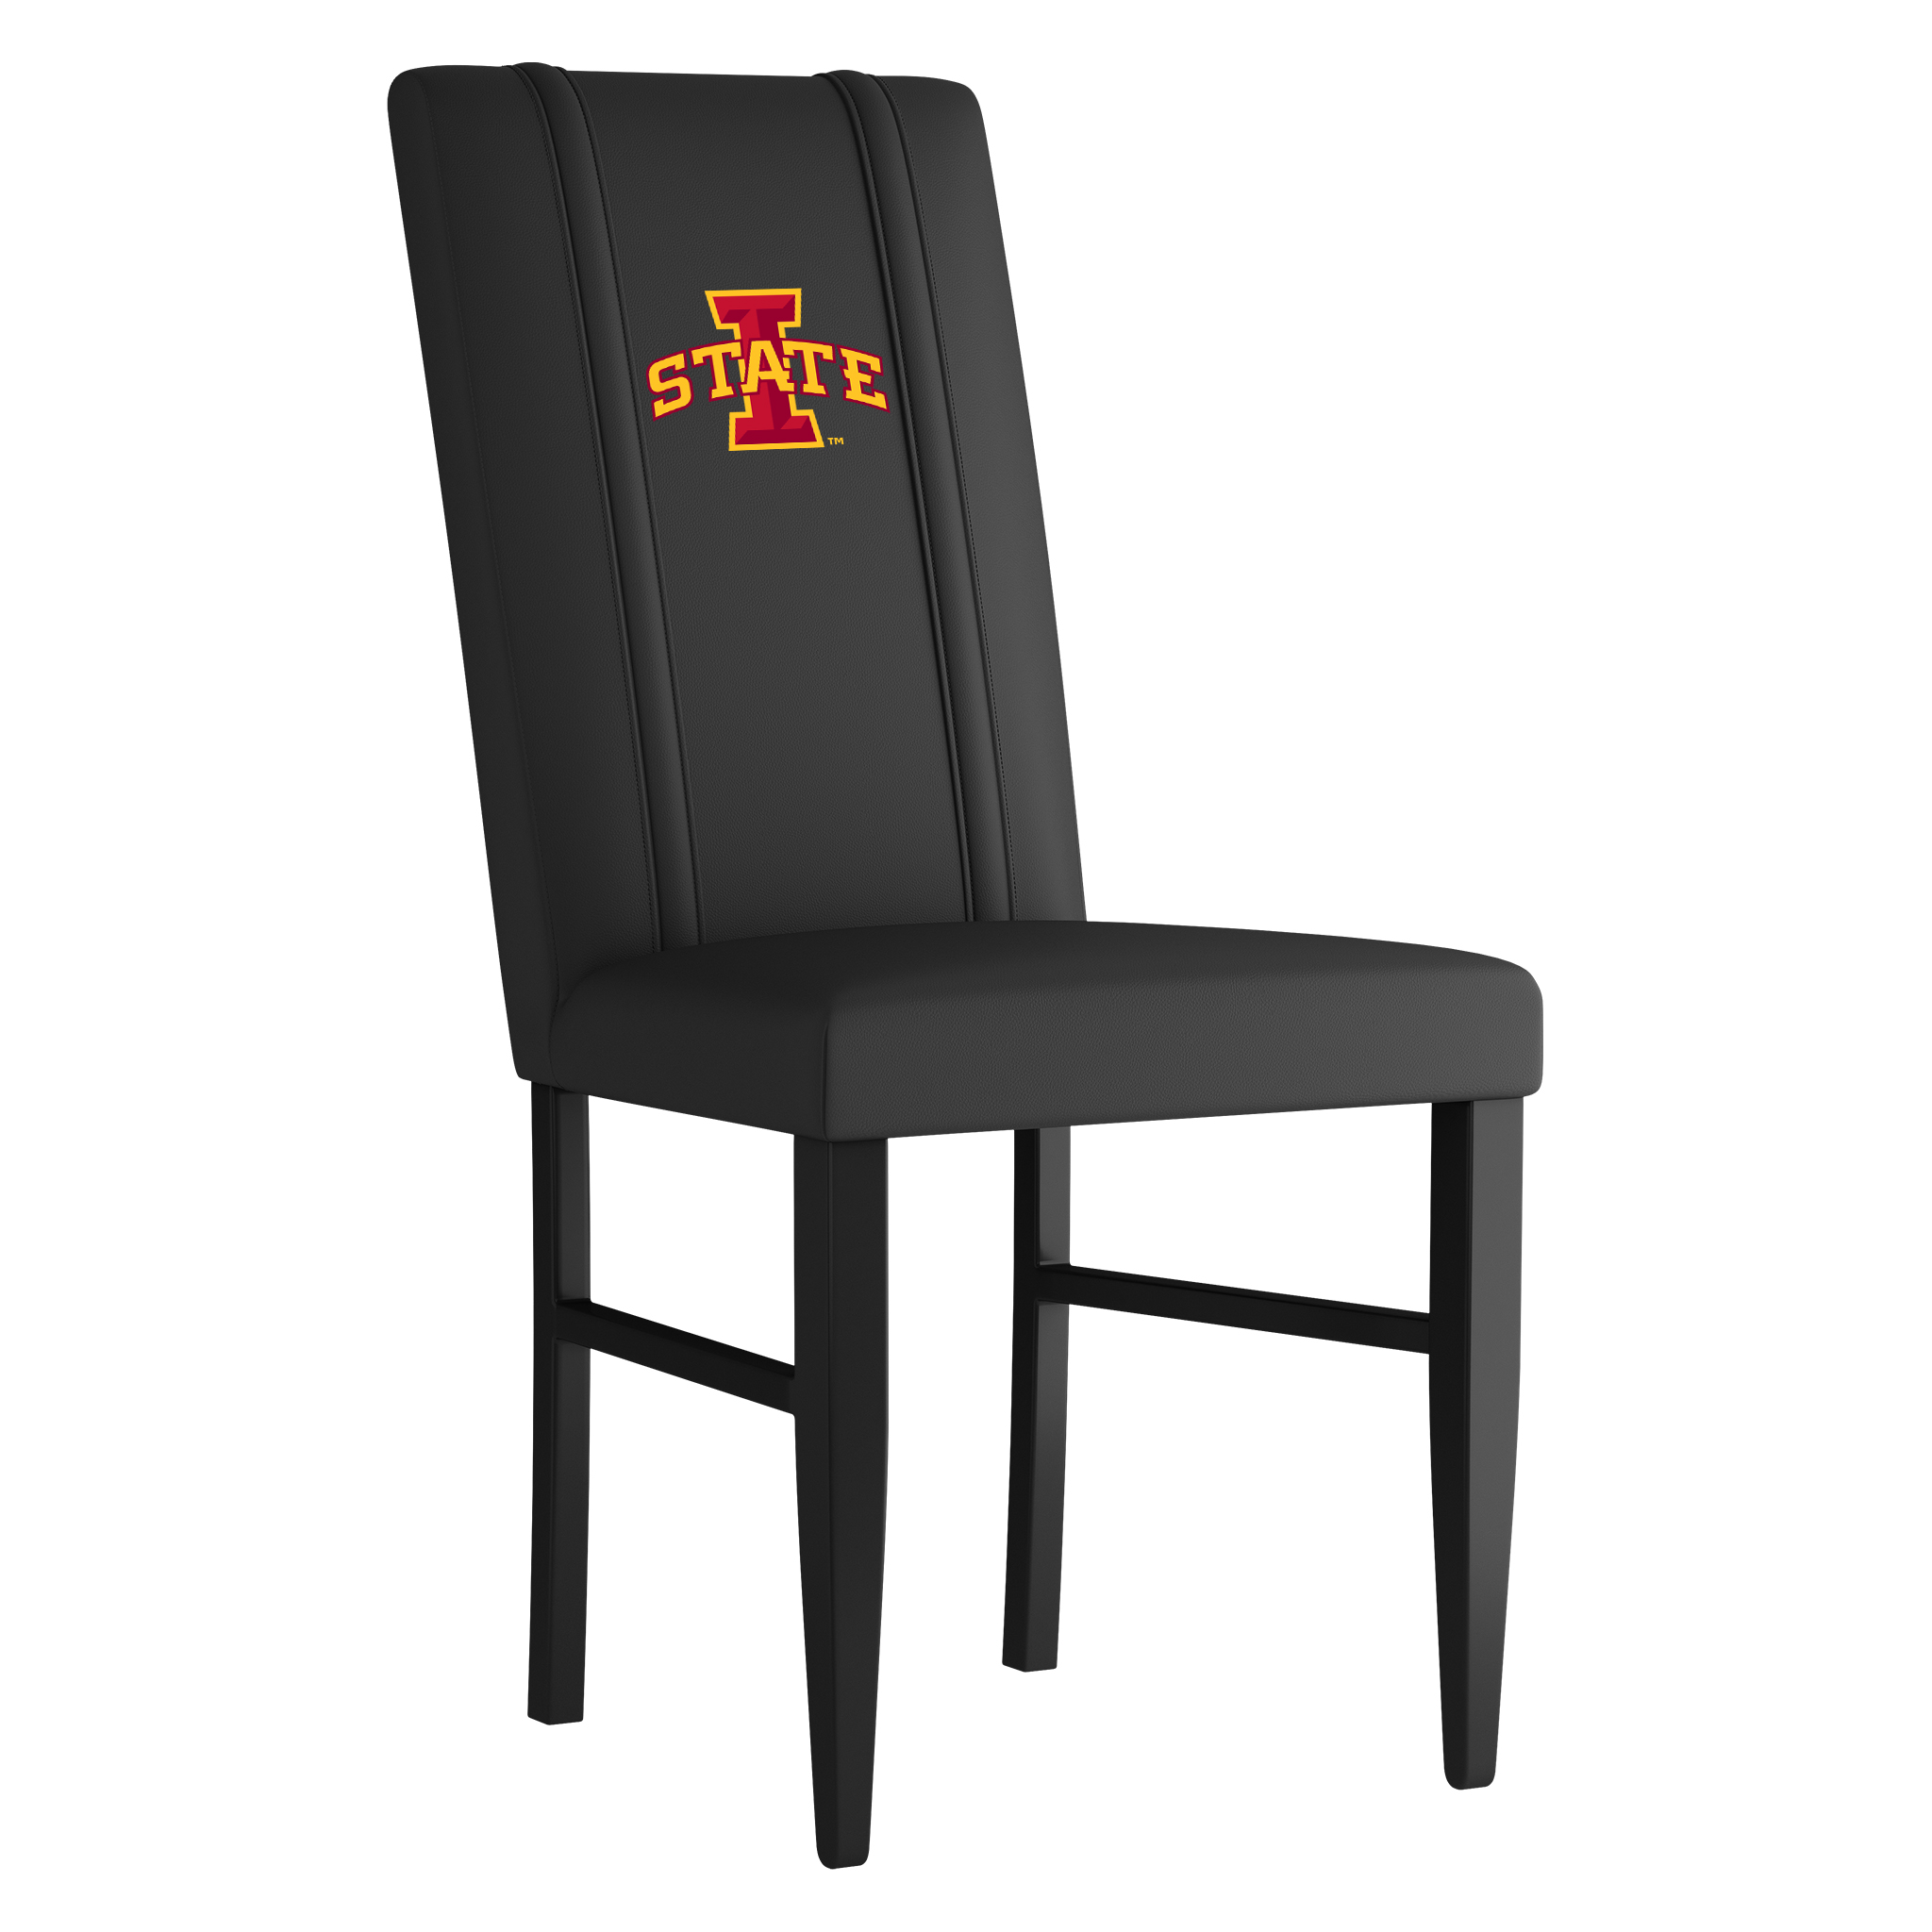 Iowa State Cyclones Side Chair 2000 With Iowa State Cyclones Logo